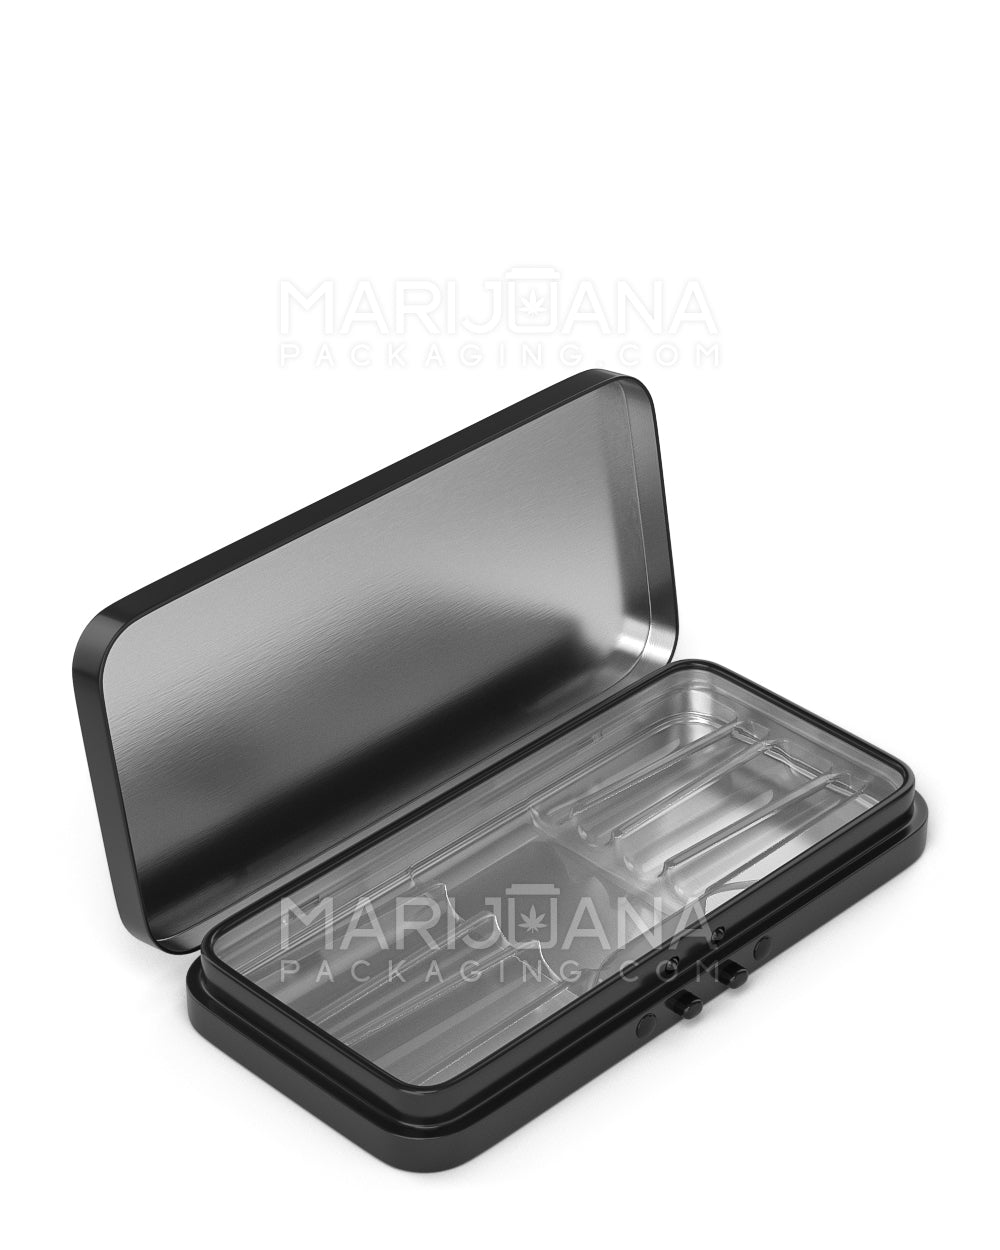 Edible & Joint Box Insert Tray for 4 King Size Pre Rolled Cones | 109mm - Clear Plastic - 100 Count - 7